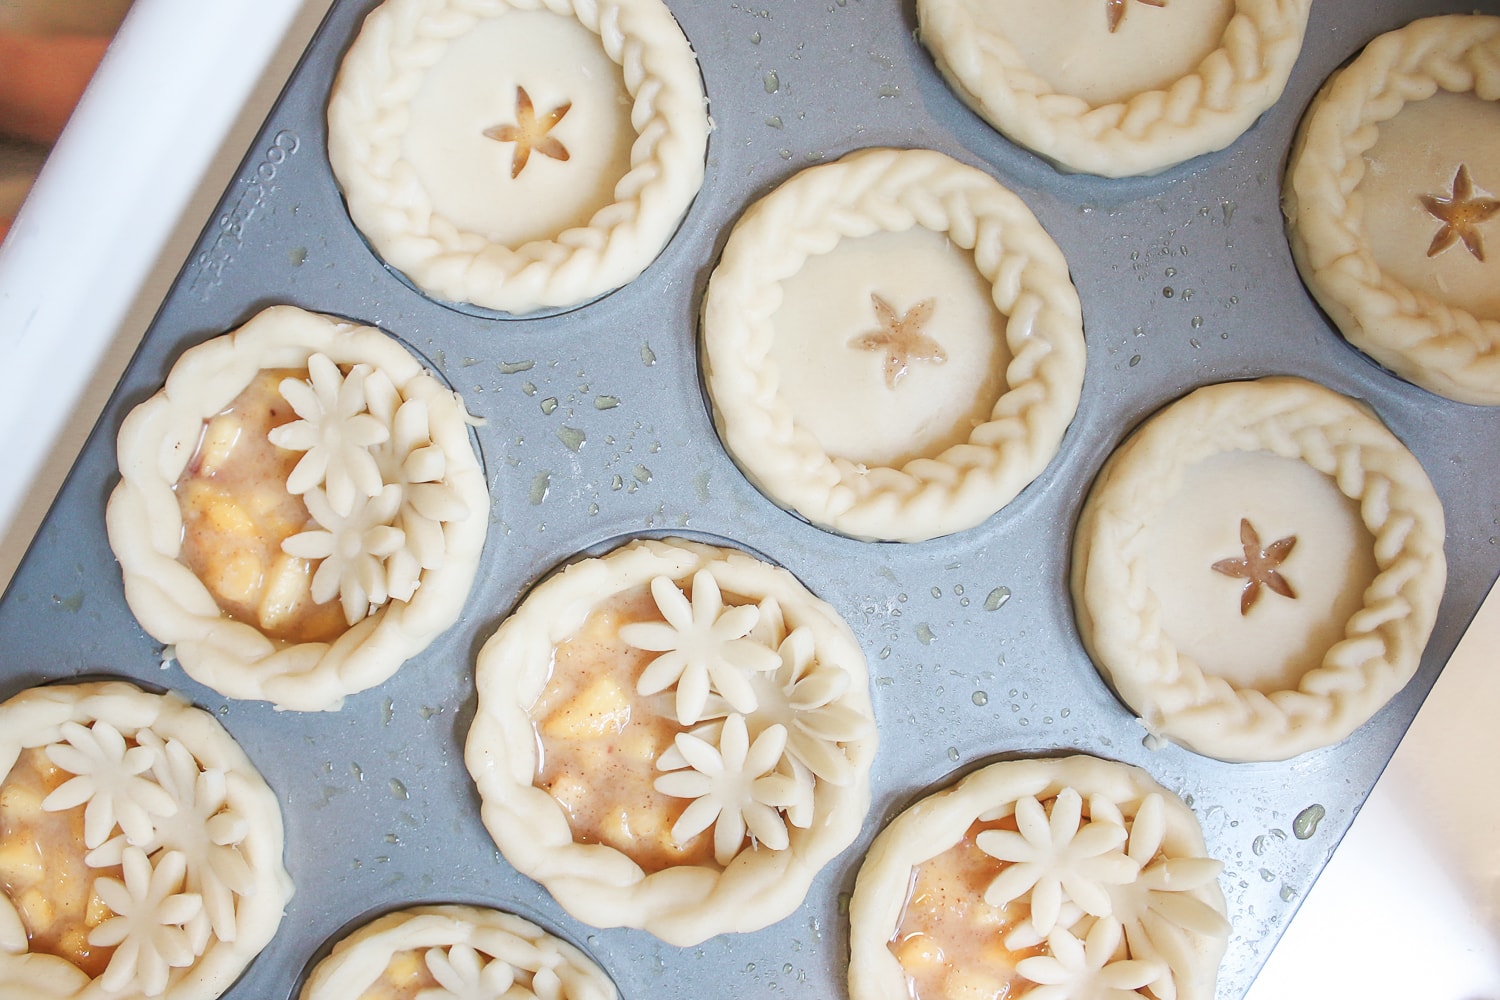 Southern lifestyle blogger shares some mini pie crust ideas on Diary of a Debutante